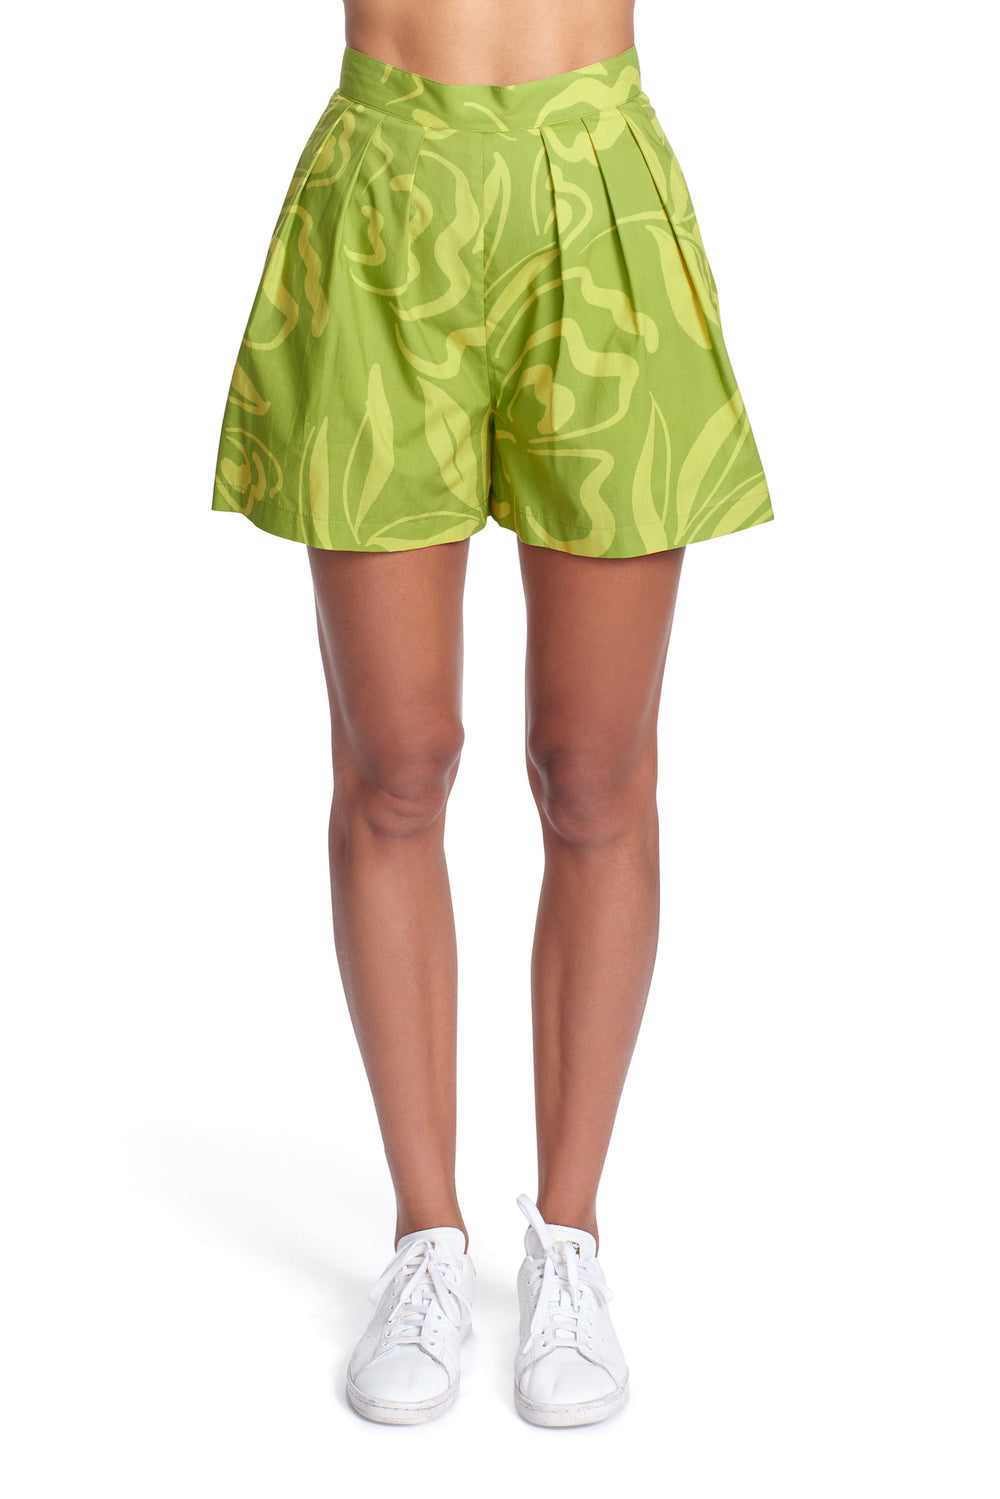 Everly Short in Spring Greens